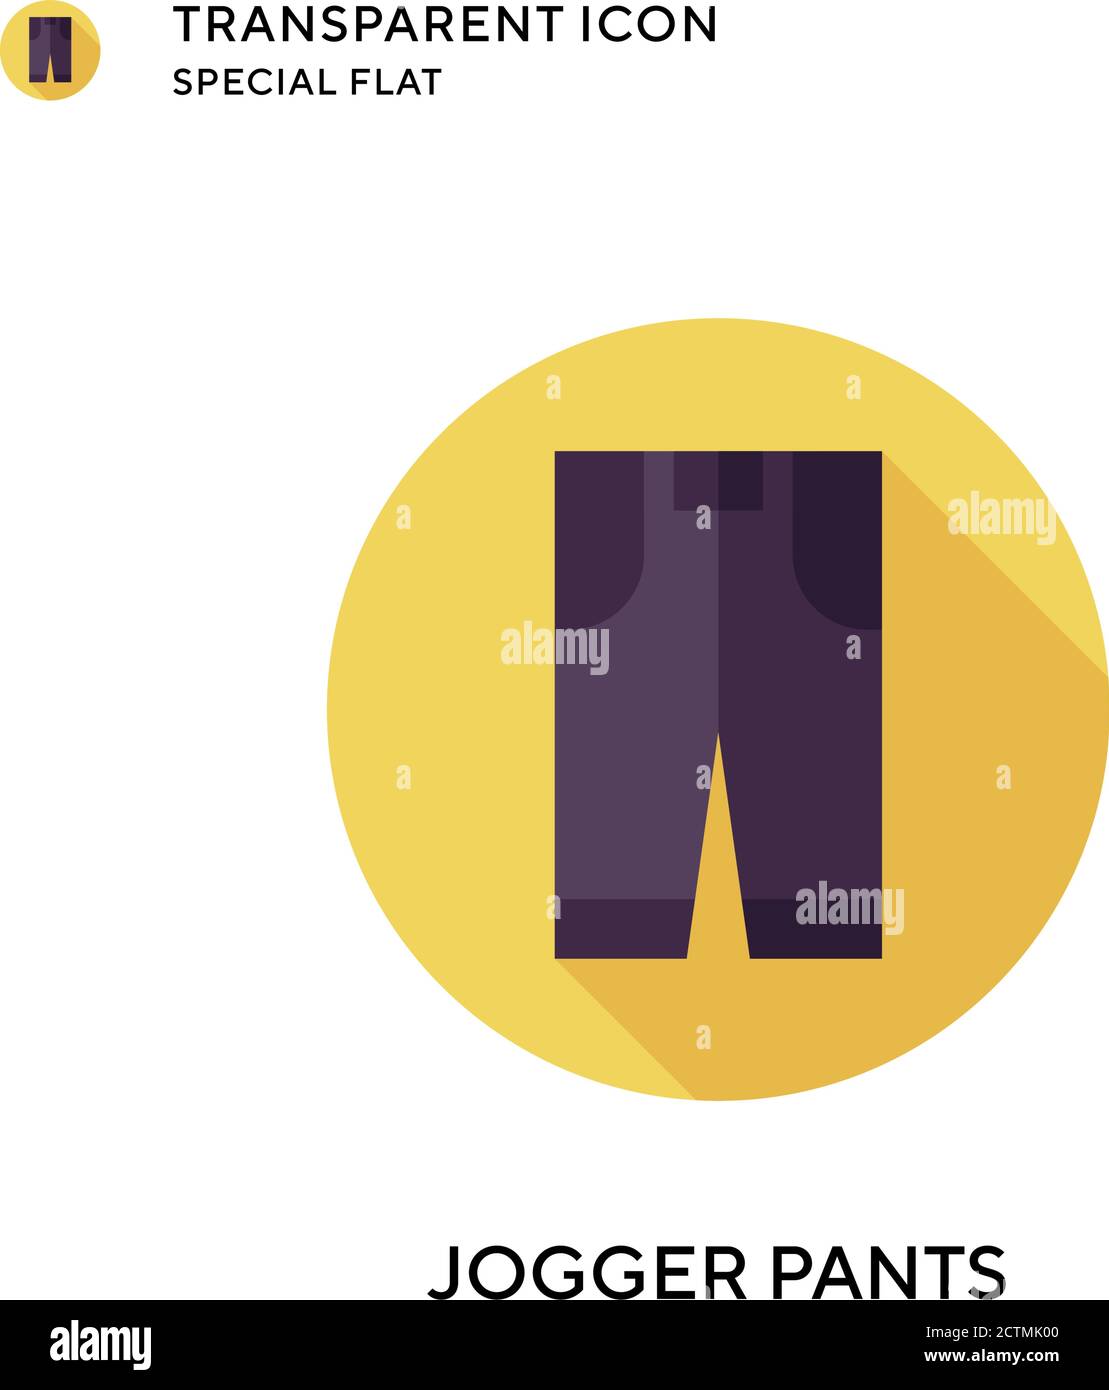 Jogger pants vector icon. Flat style illustration. EPS 10 vector. Stock Vector